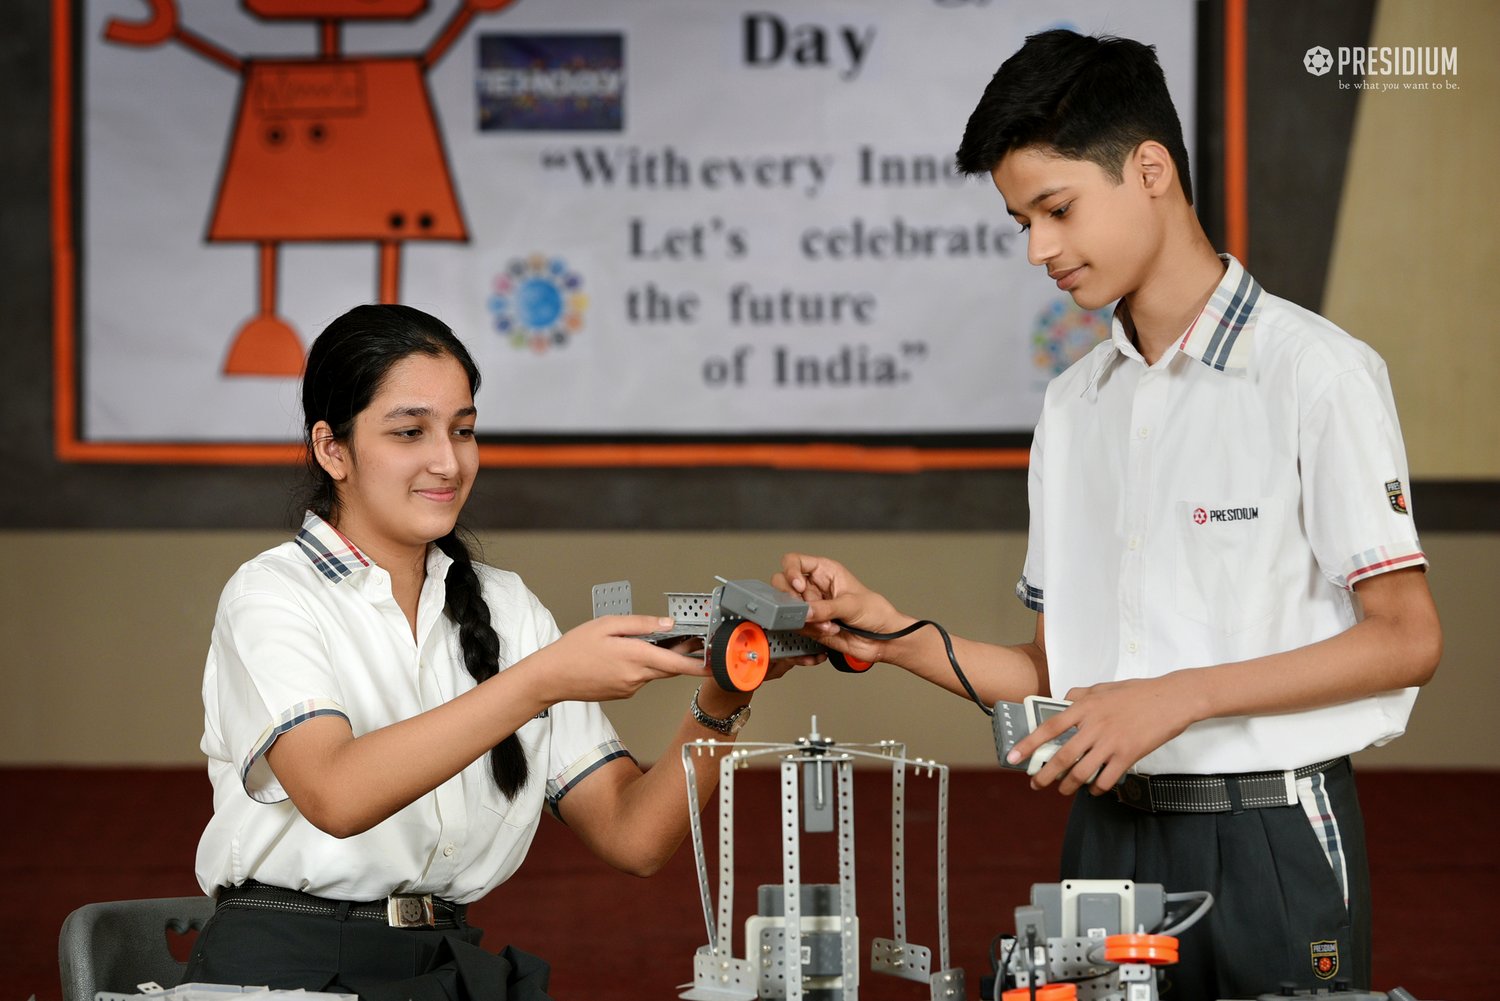 NATIONAL TECHNOLOGY DAY: CELEBRATING THE SHAPERS OF TECHNOLOGY!